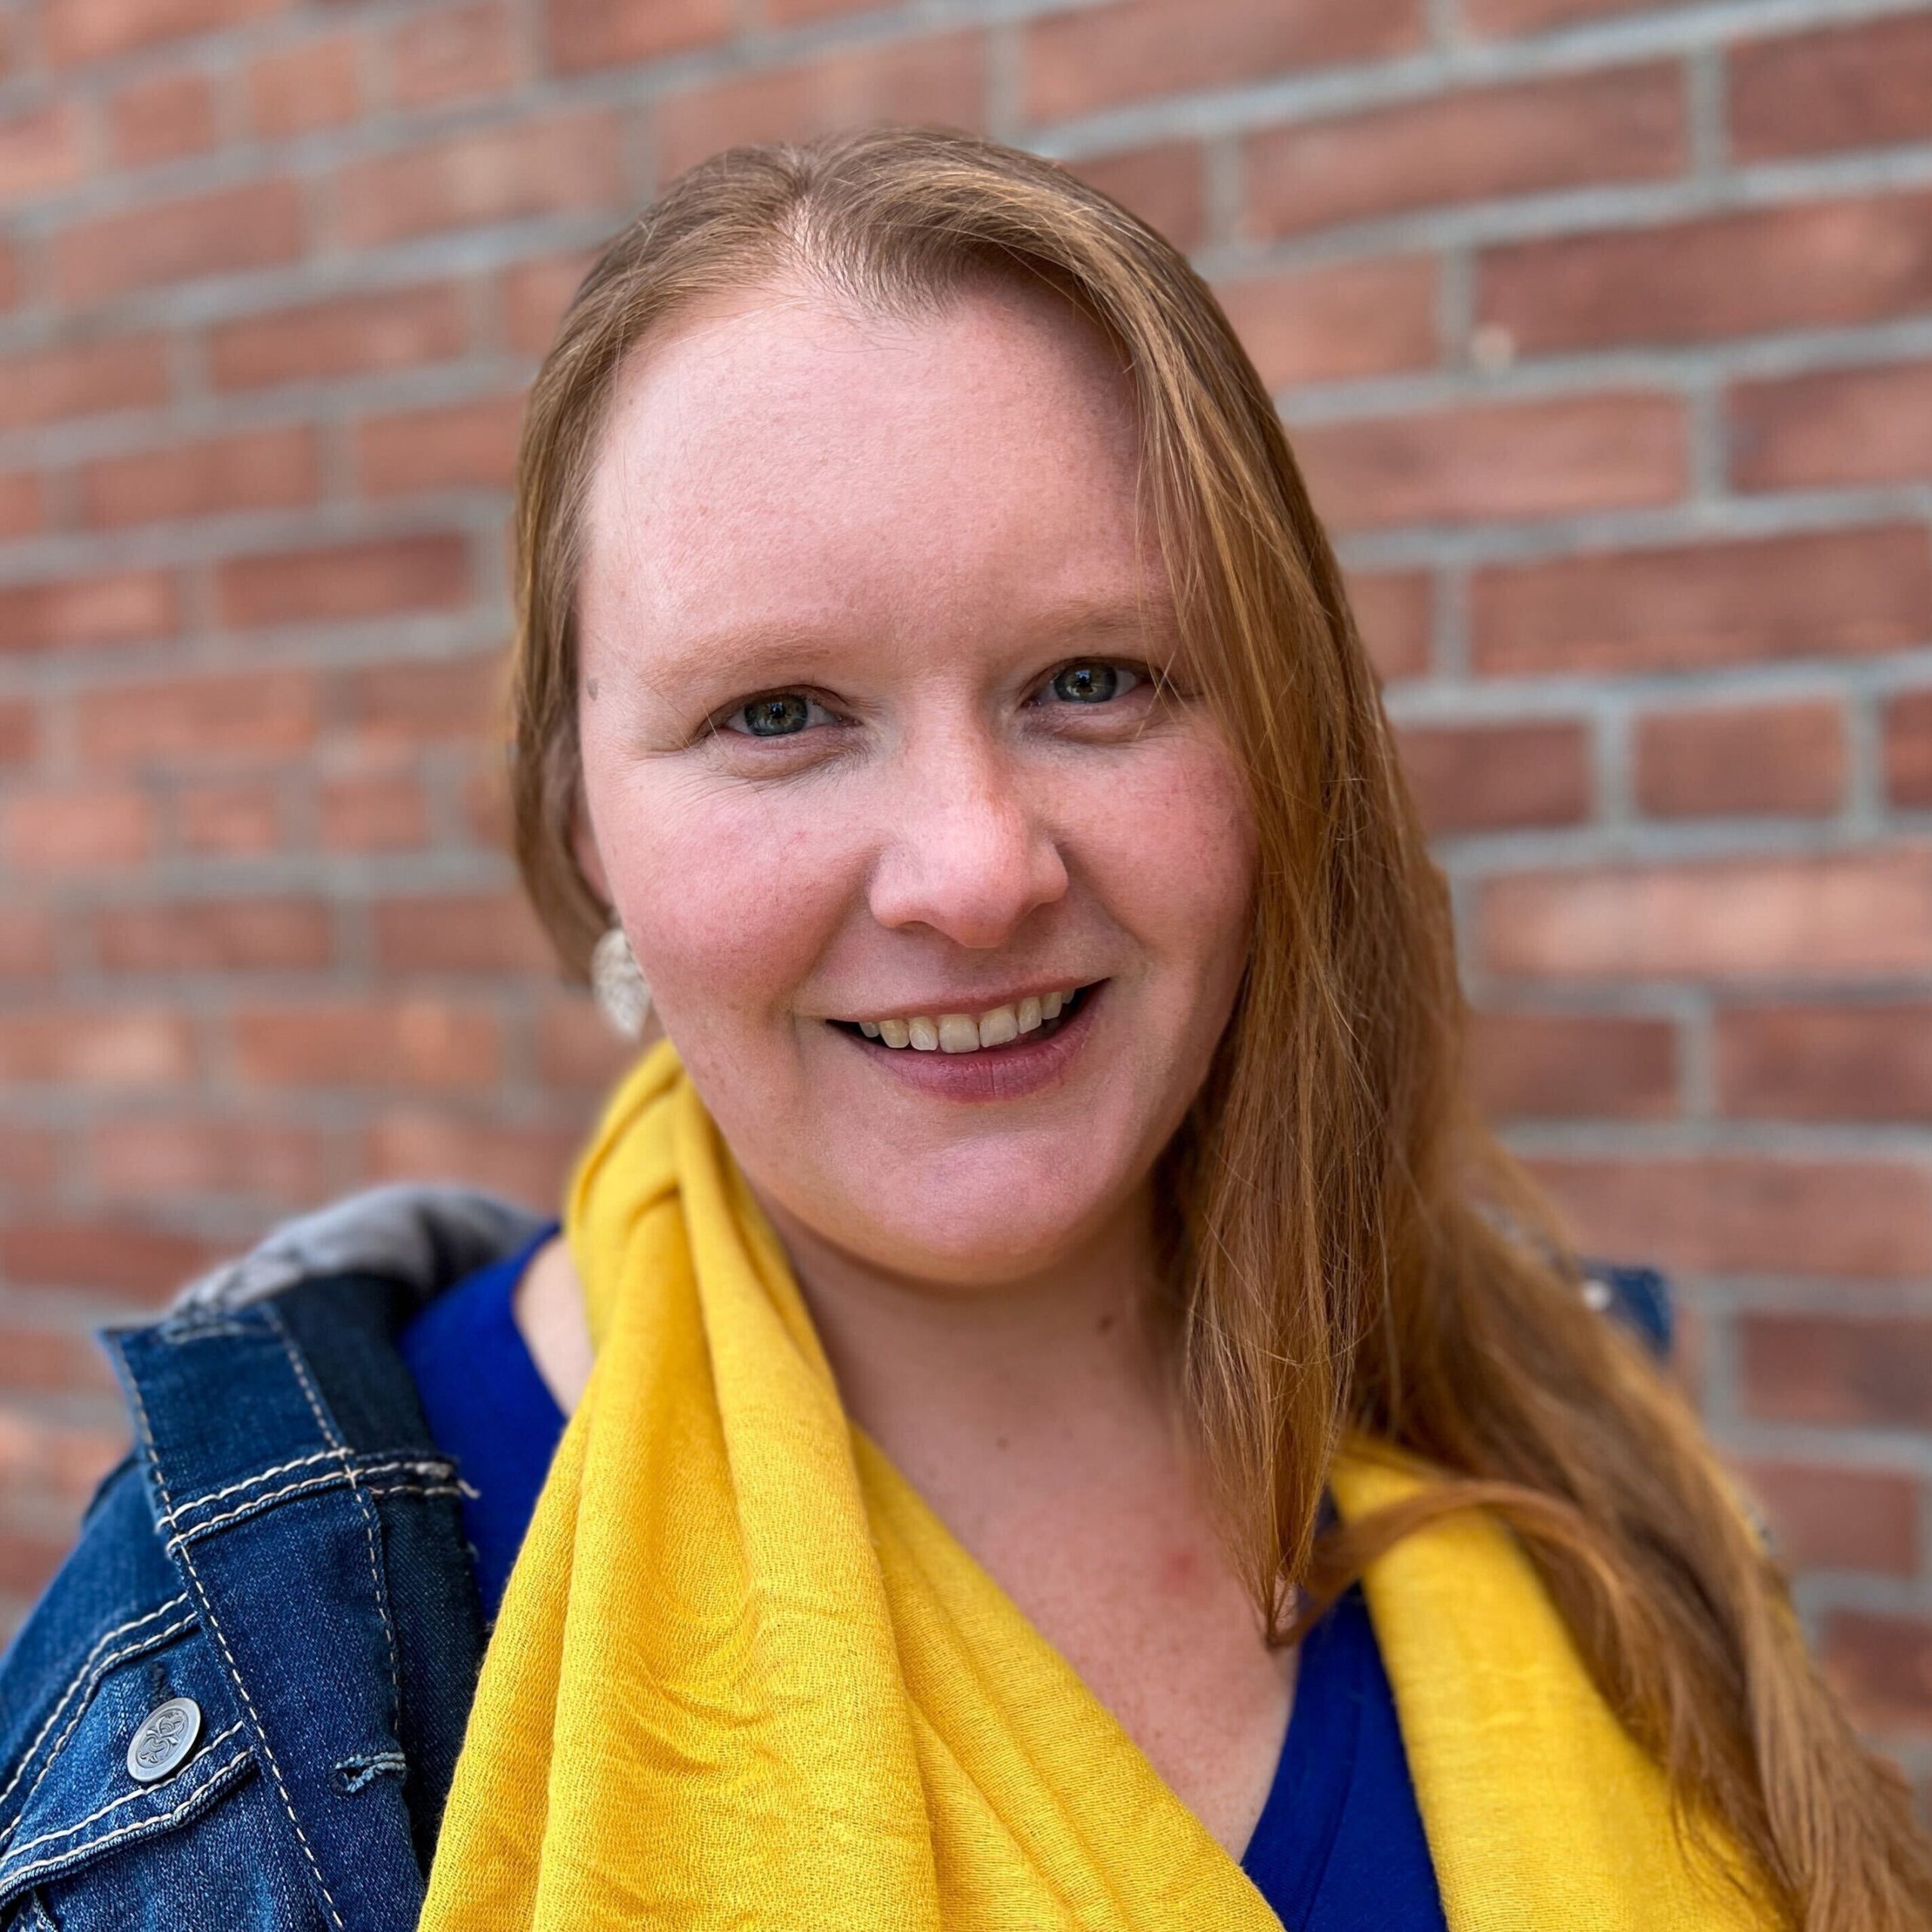 Woman with red hair, a yellow scarf, and blue shirt smiling